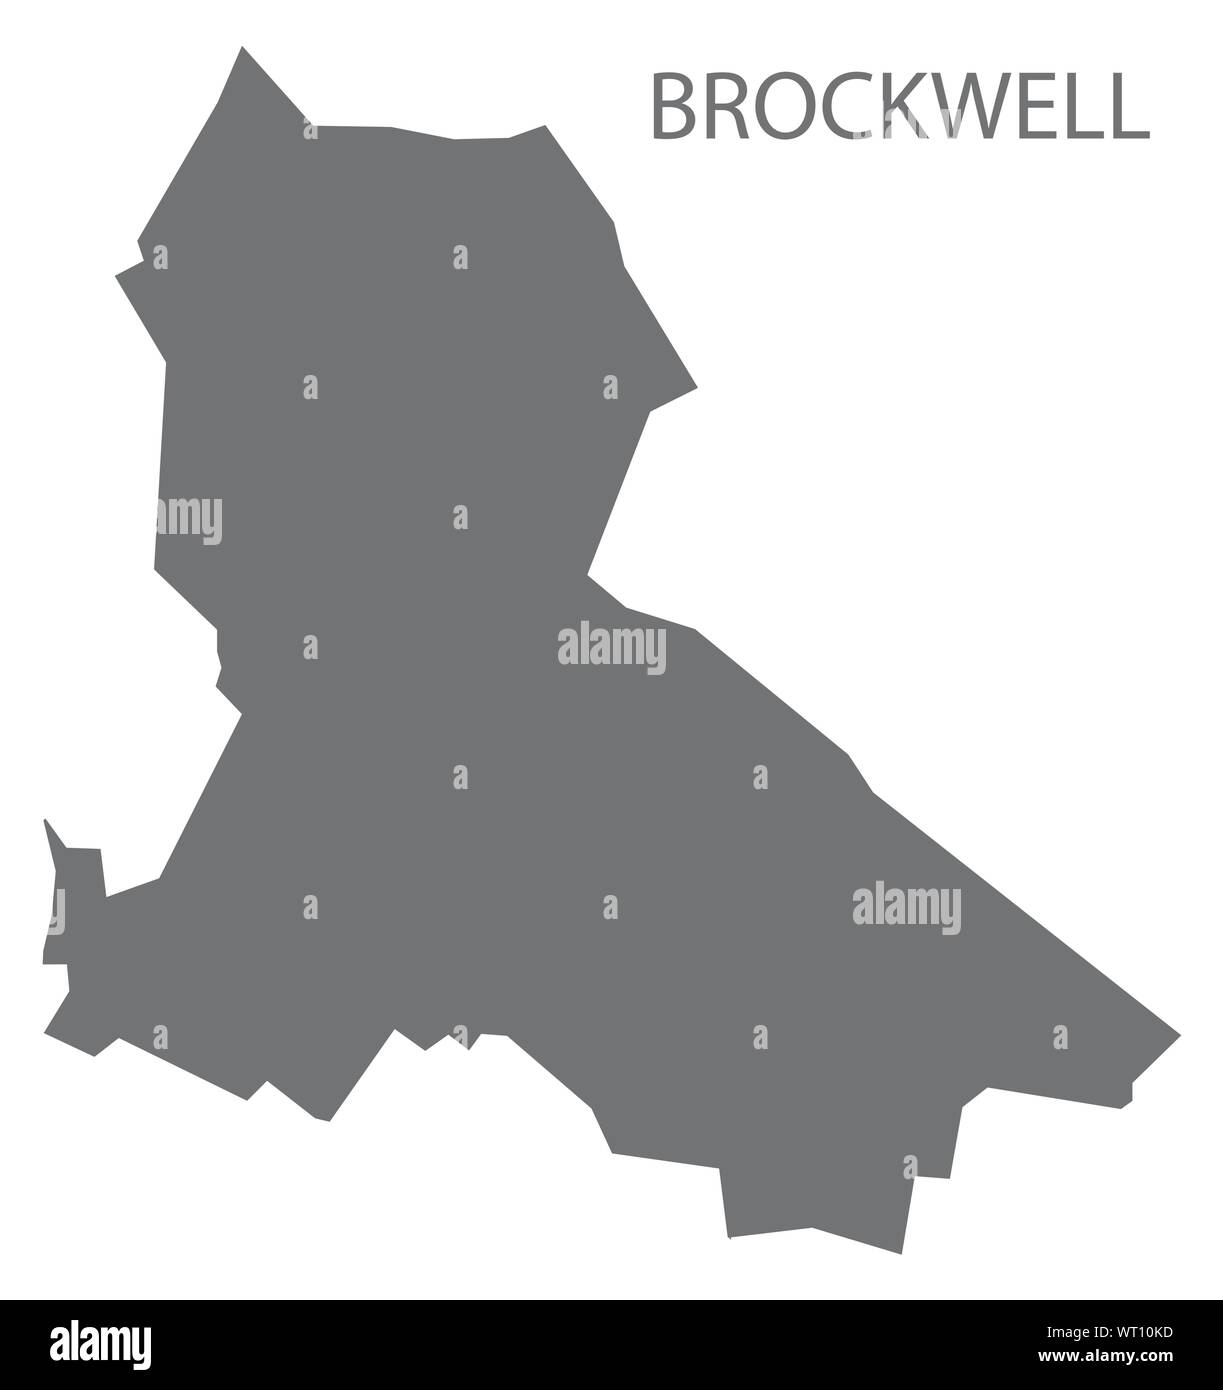 Brockwell grey ward map of Chesterfield district in East Midlands England UK Stock Vector